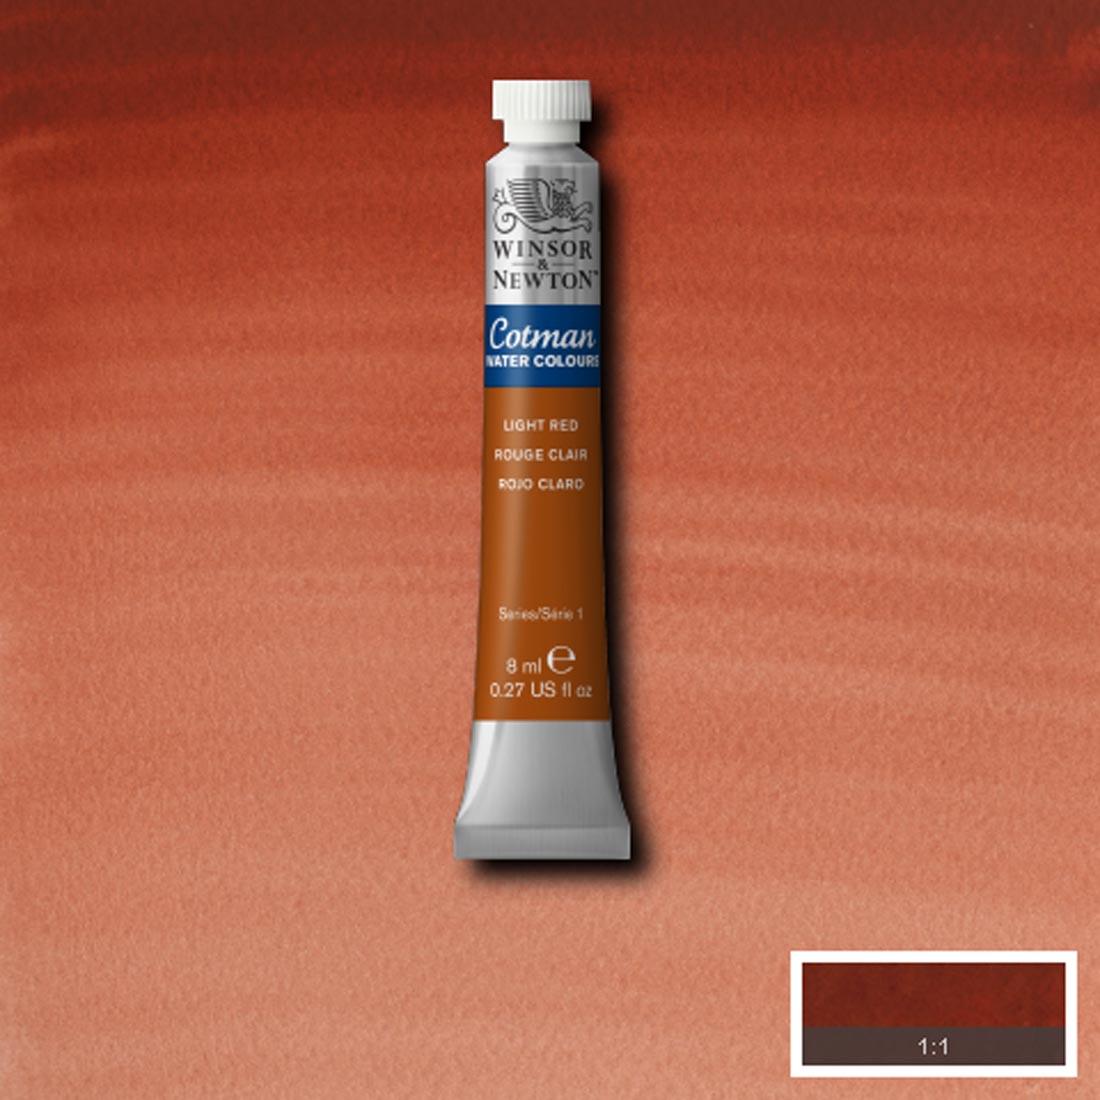 Tube of Light Red Winsor and Newton Cotman Water Colour with a paint swatch for the background